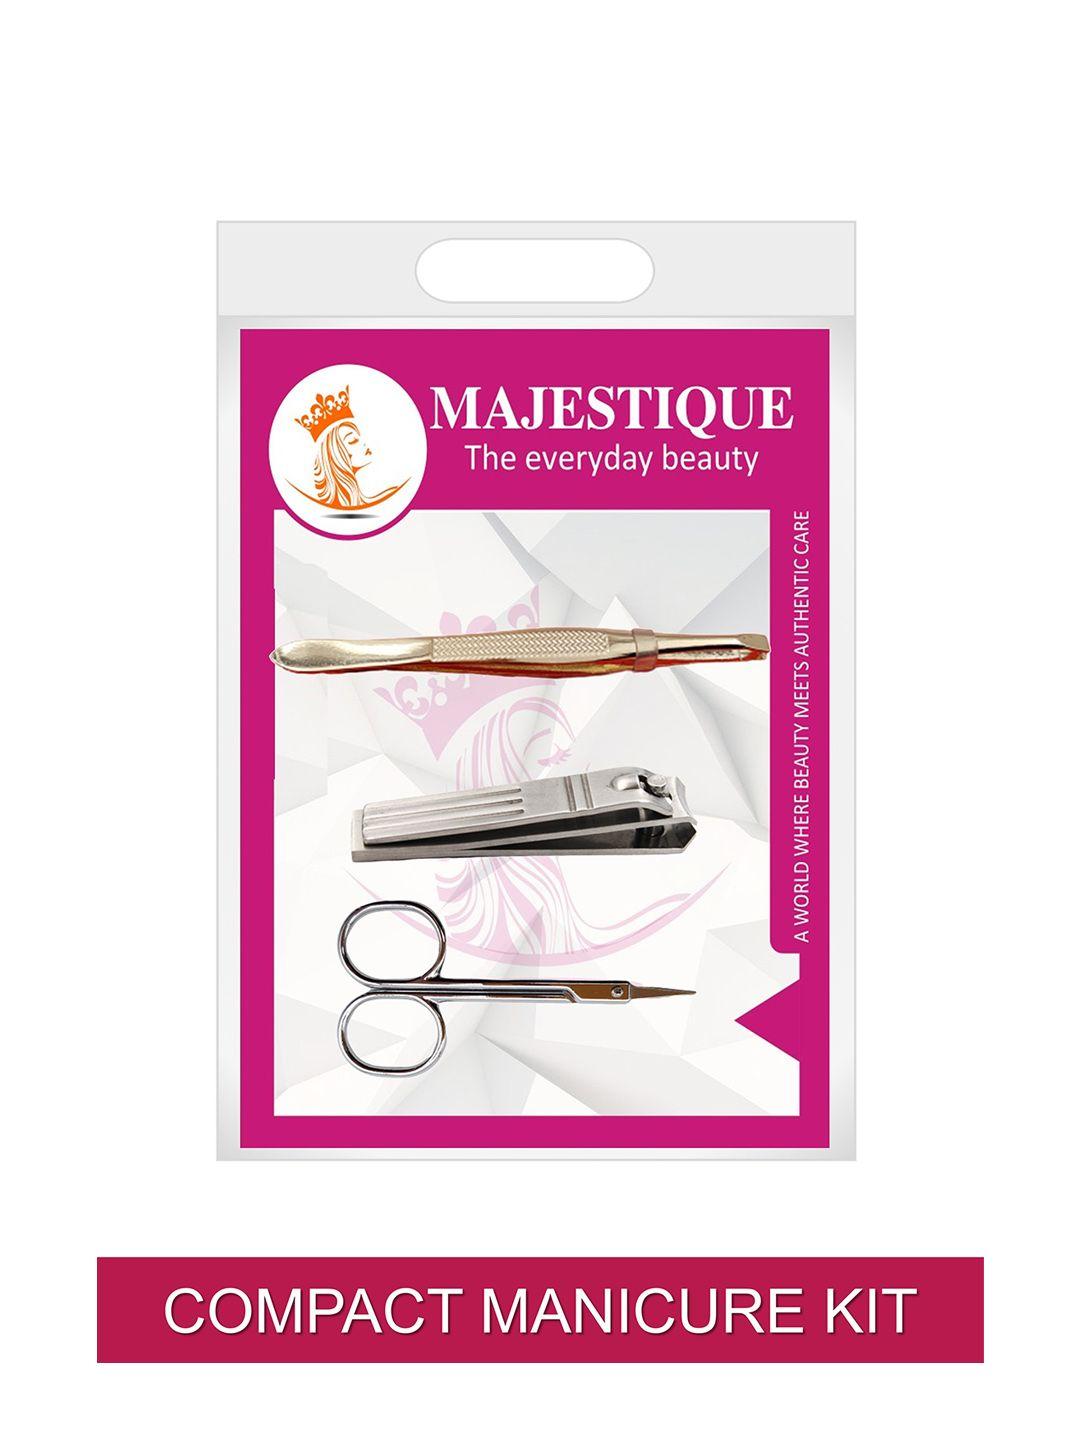 majestique manicure & beauty tool kit for nail and face grooming